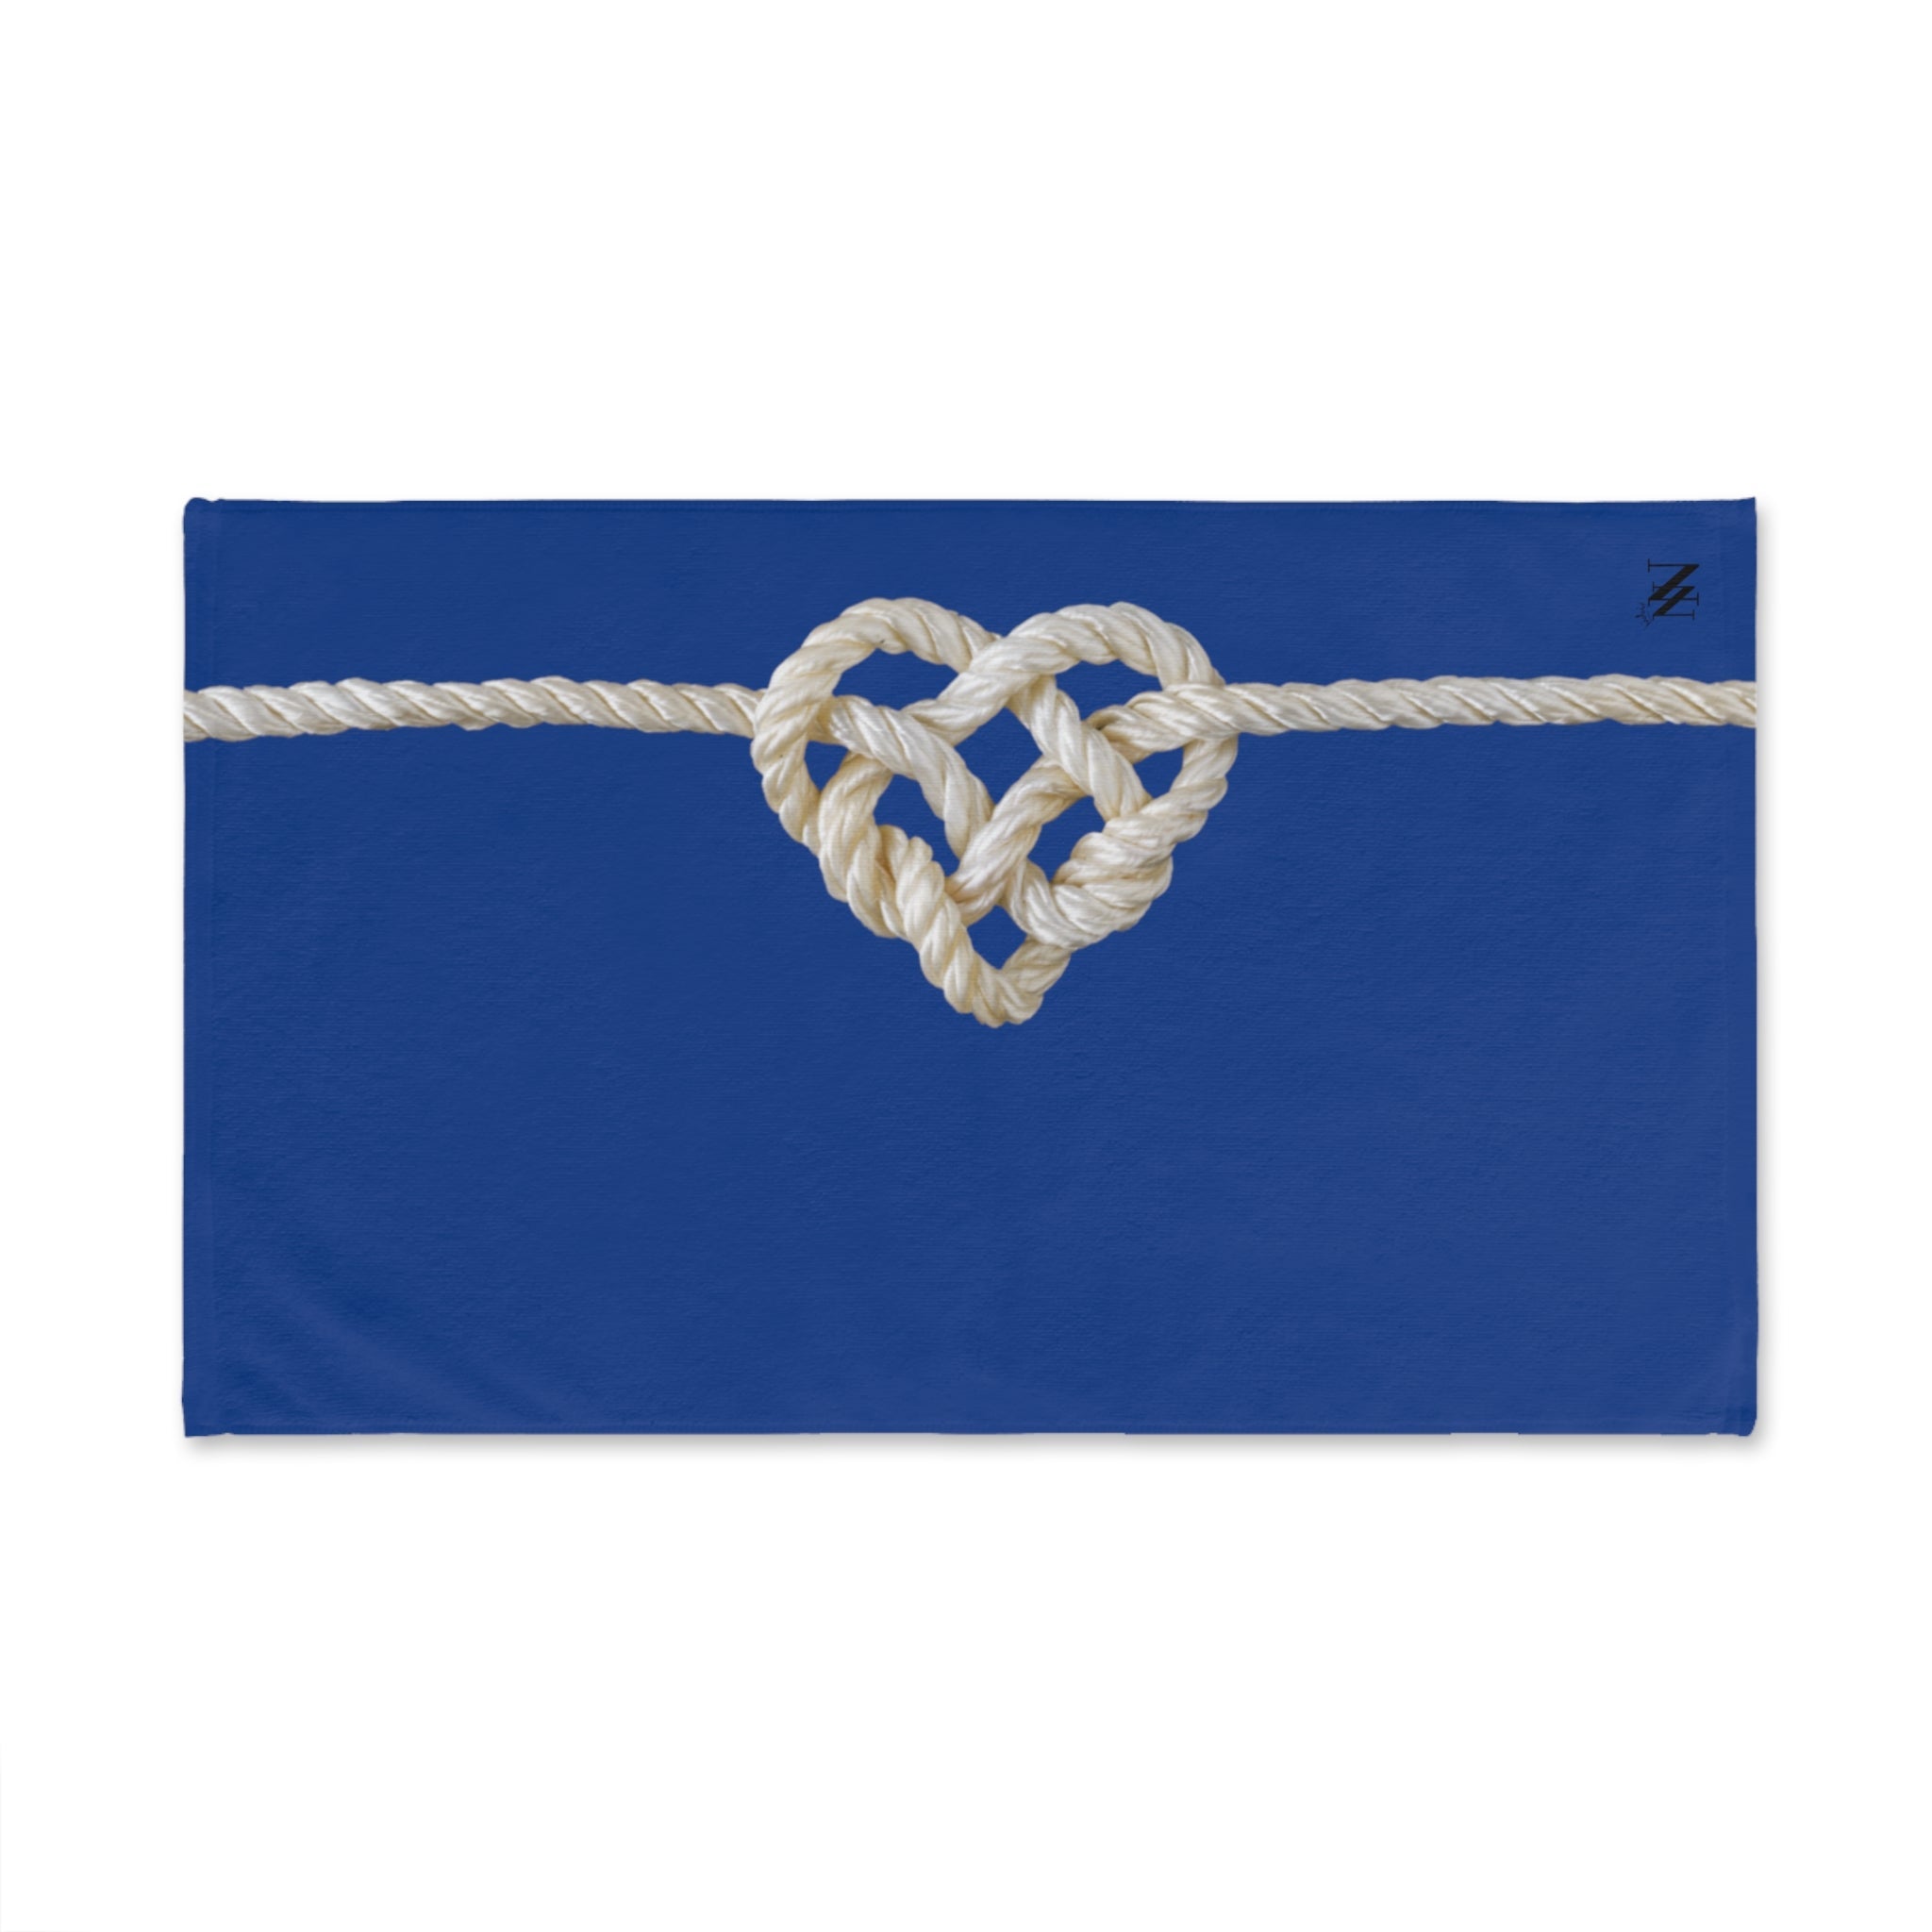 Heart Knot Blue | Gifts for Boyfriend, Funny Towel Romantic Gift for Wedding Couple Fiance First Year Anniversary Valentines, Party Gag Gifts, Joke Humor Cloth for Husband Men BF NECTAR NAPKINS